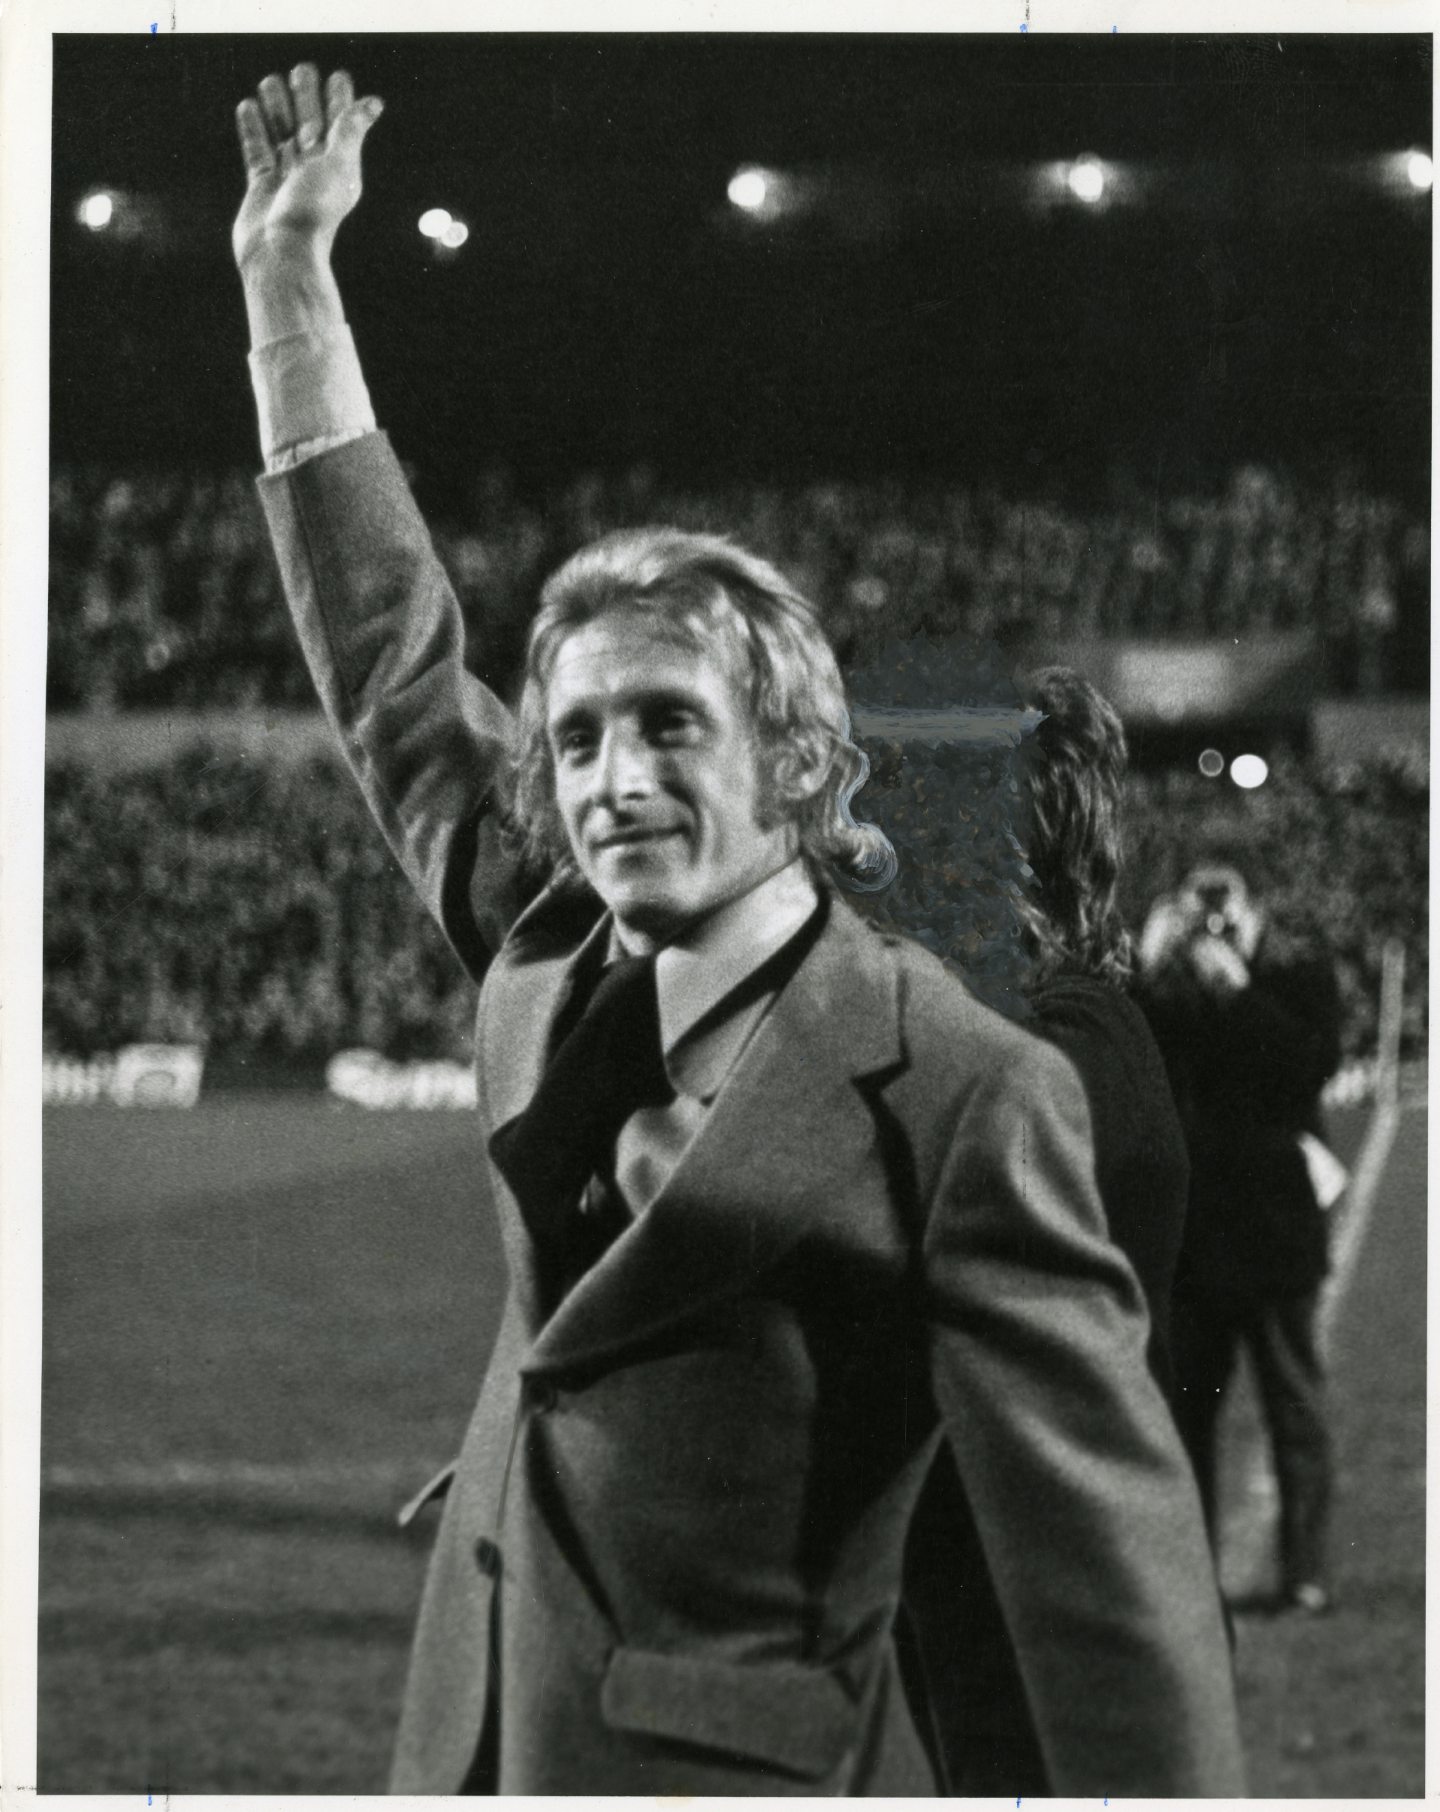 Law eventually waved goodbye to Old Trafford in 1973.